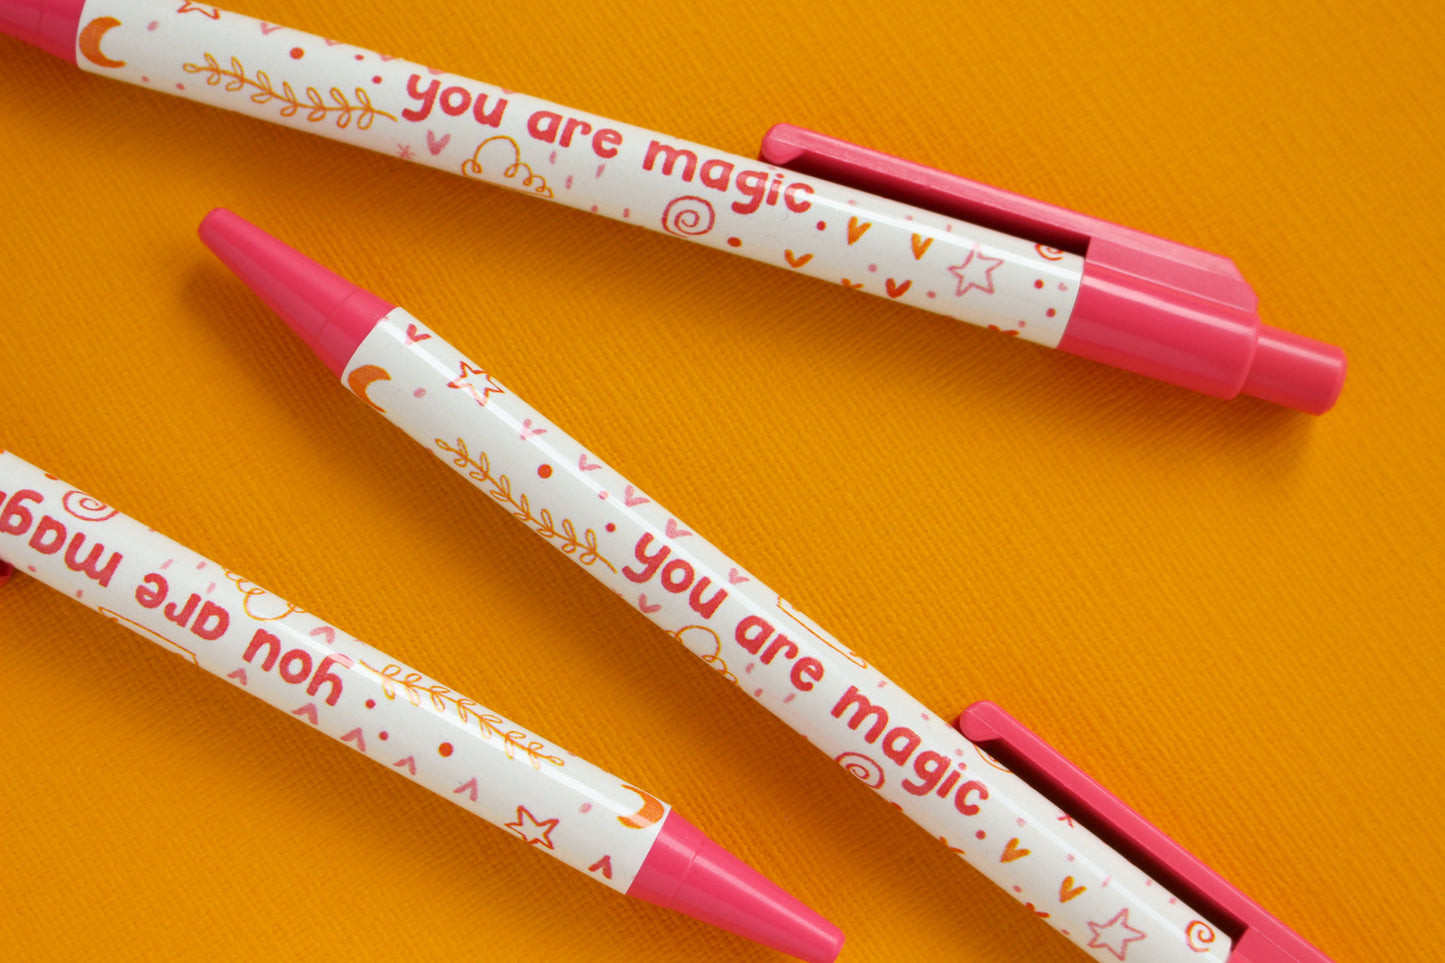 You Are Magic Illustrated Ballpoint Pen